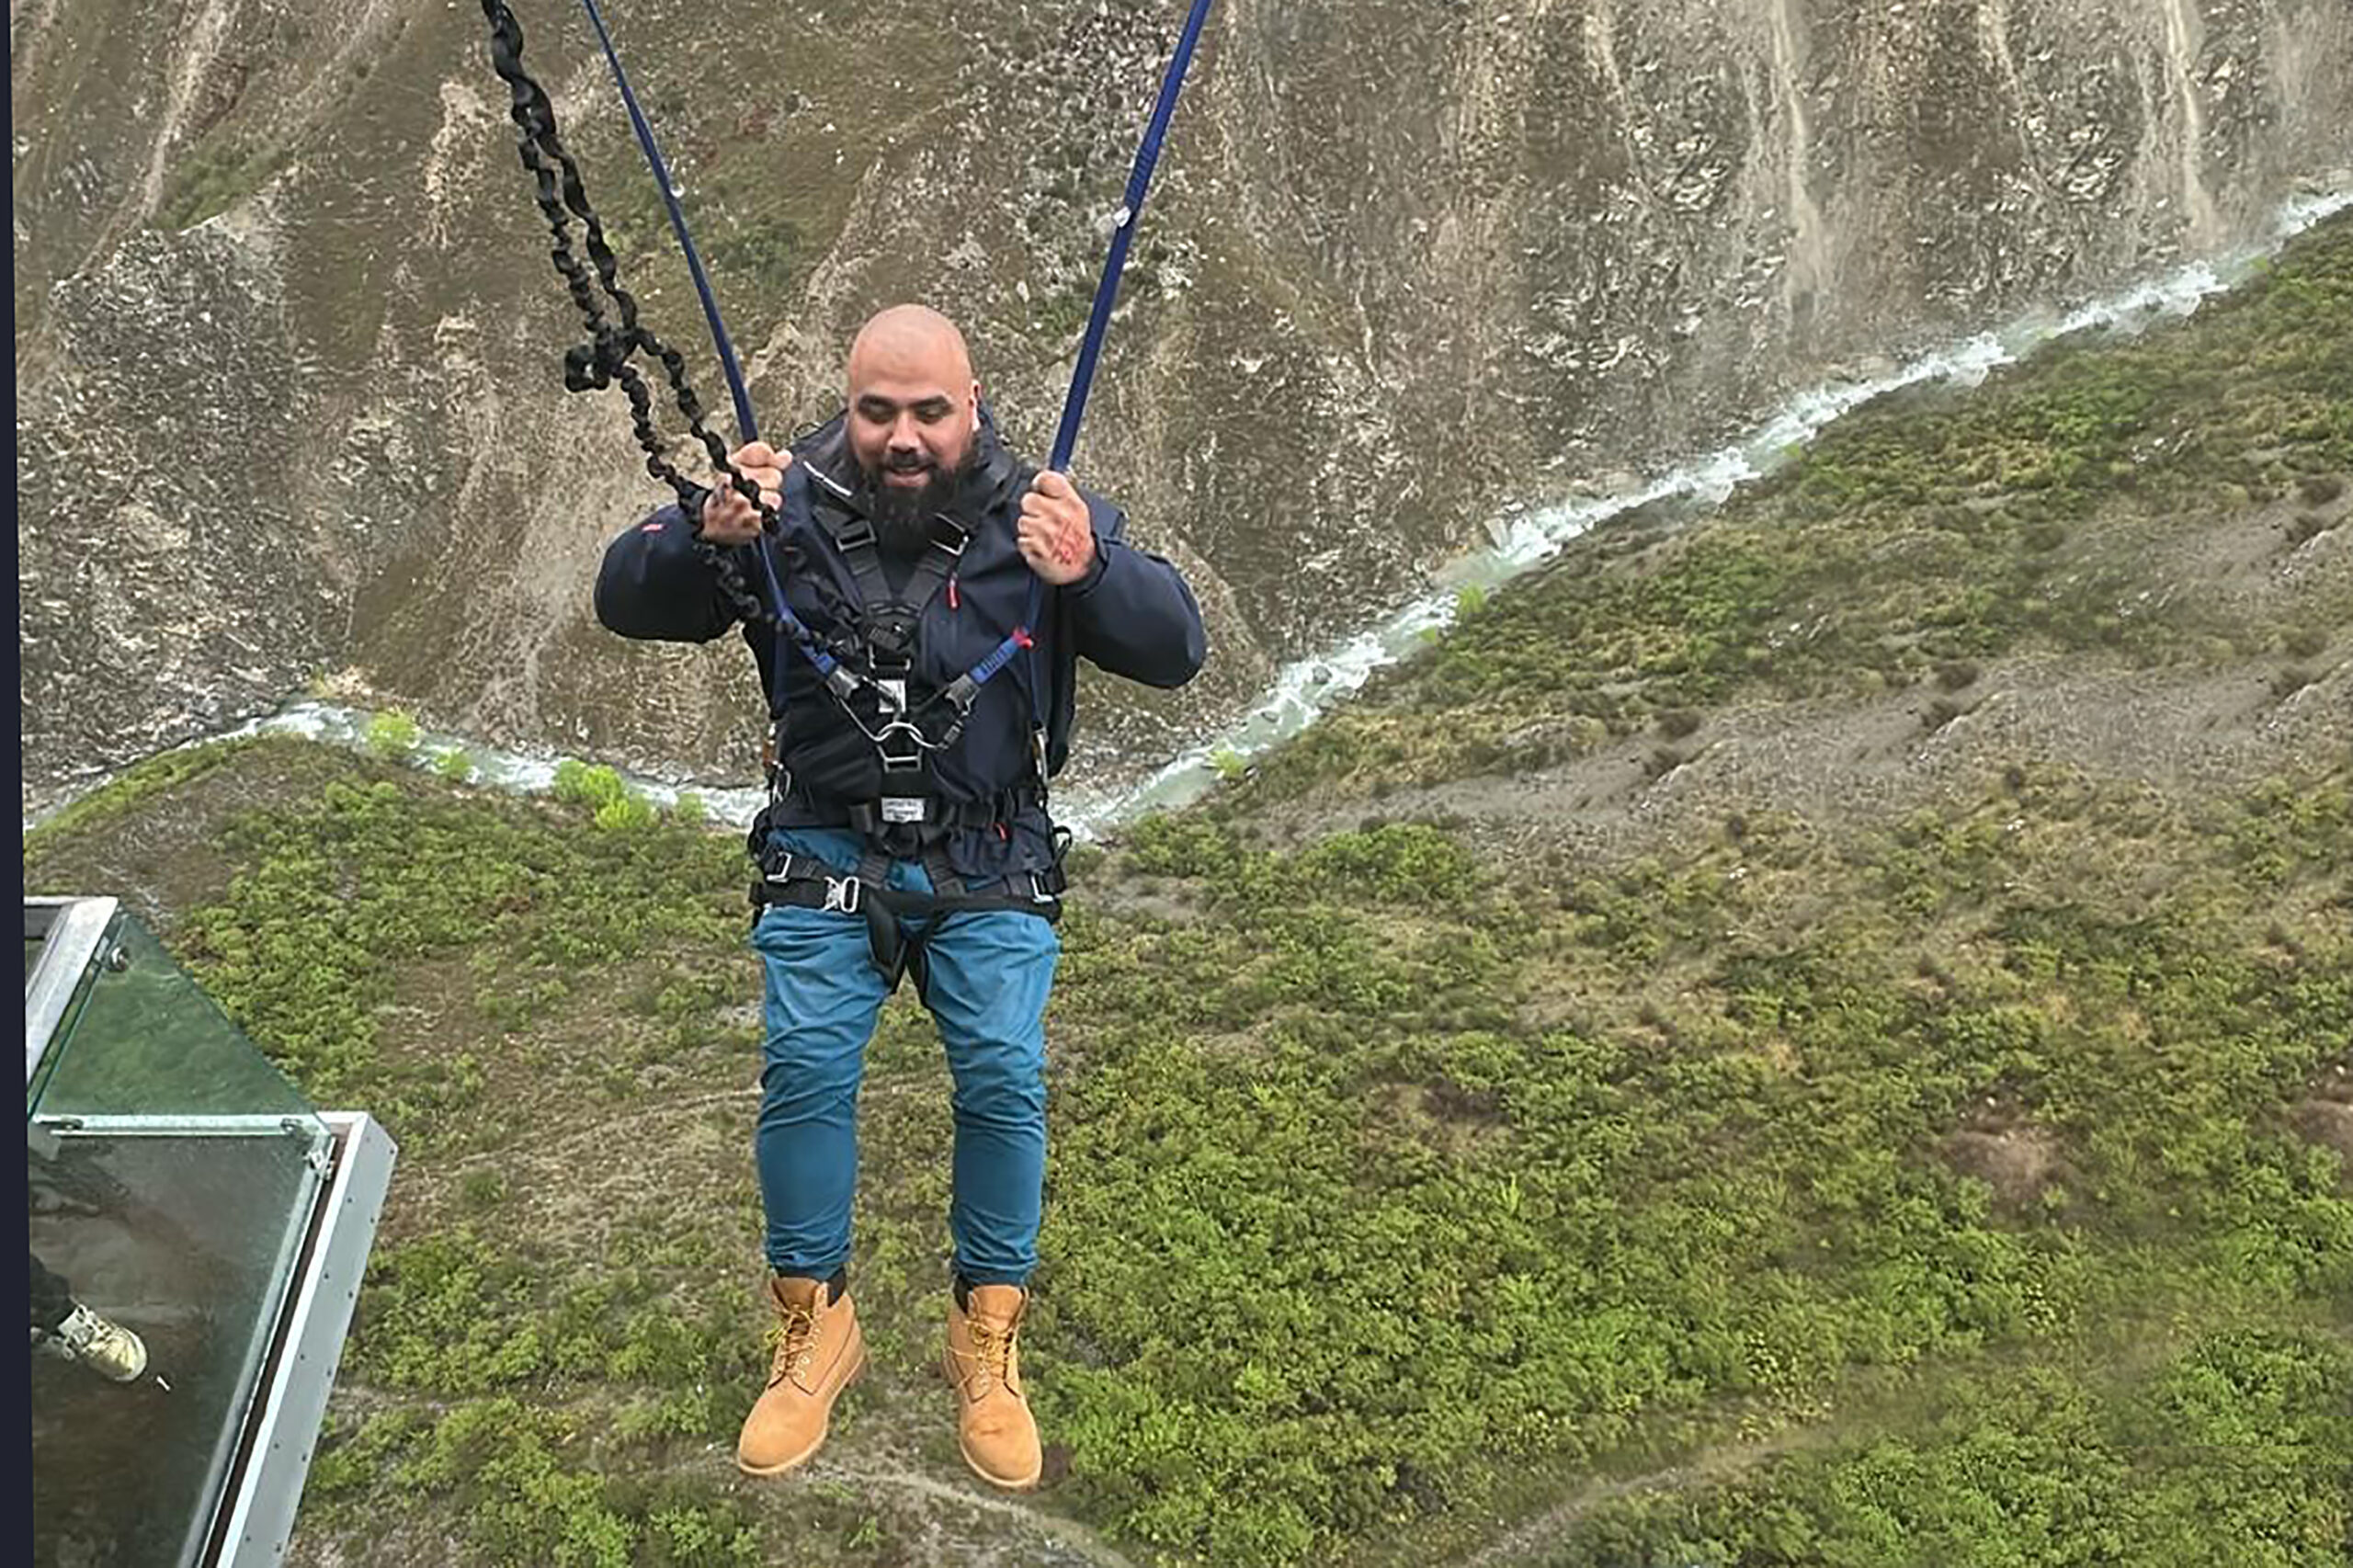 Heart-stopping moment fearless TV chef Chris flies through the air at 75mph on world’s biggest swing